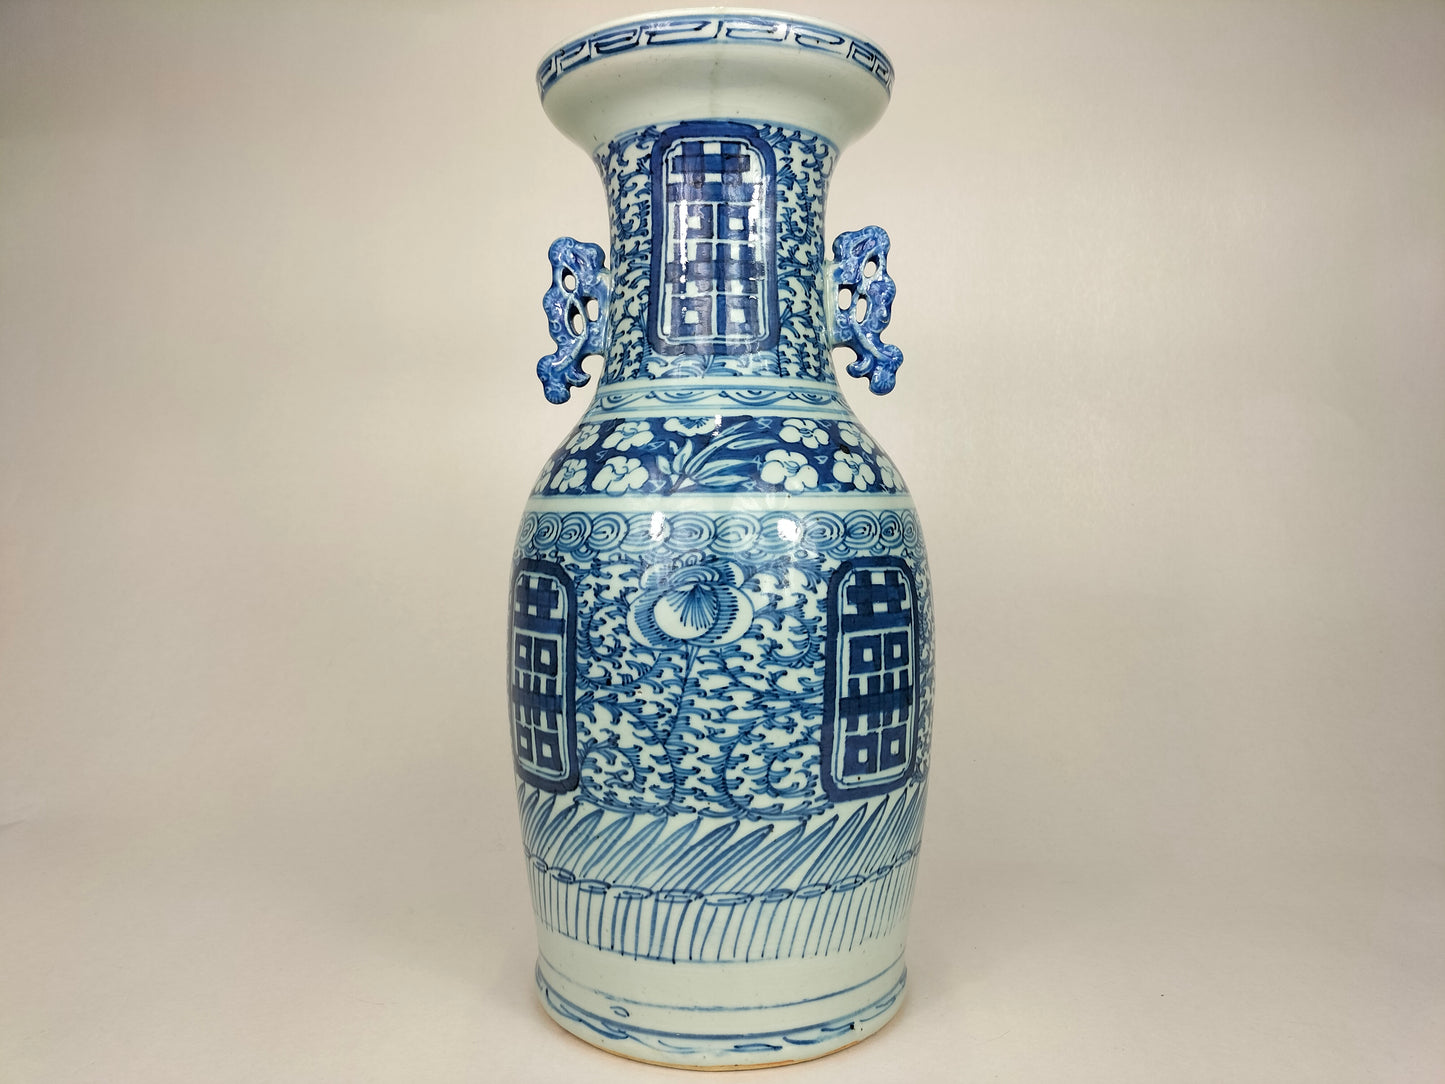 Antique 19th century blue white Chinese double happiness vase